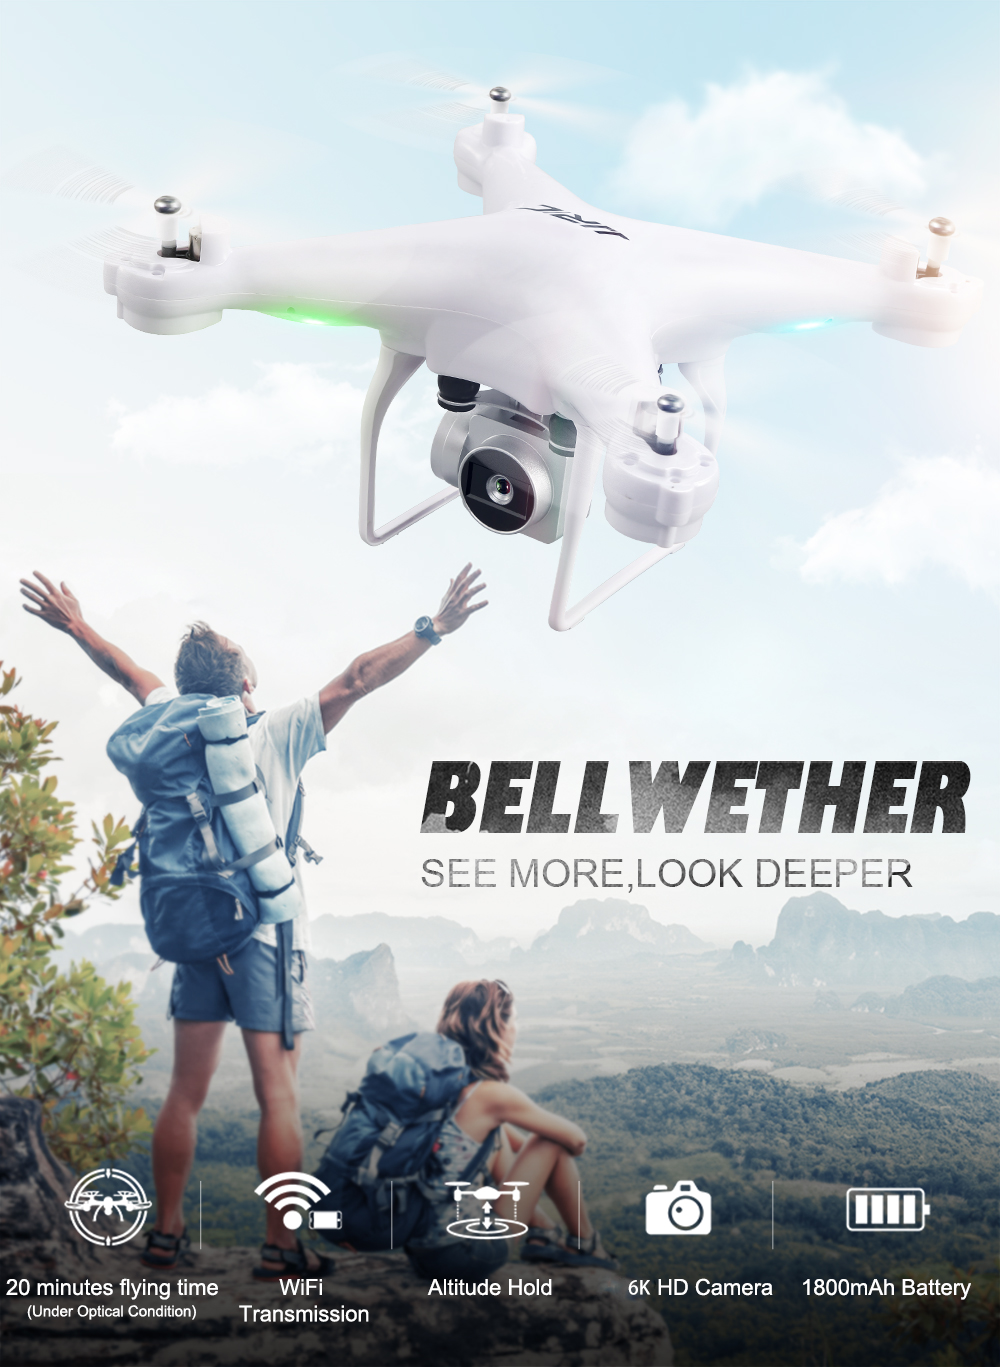 JJRC-H68-Bellwether-WiFi-FPV-with-6K-720P-HD-Camera-20mins-Flight-Time-Altitude-Hold-Headless-Mode-R-1909760-1